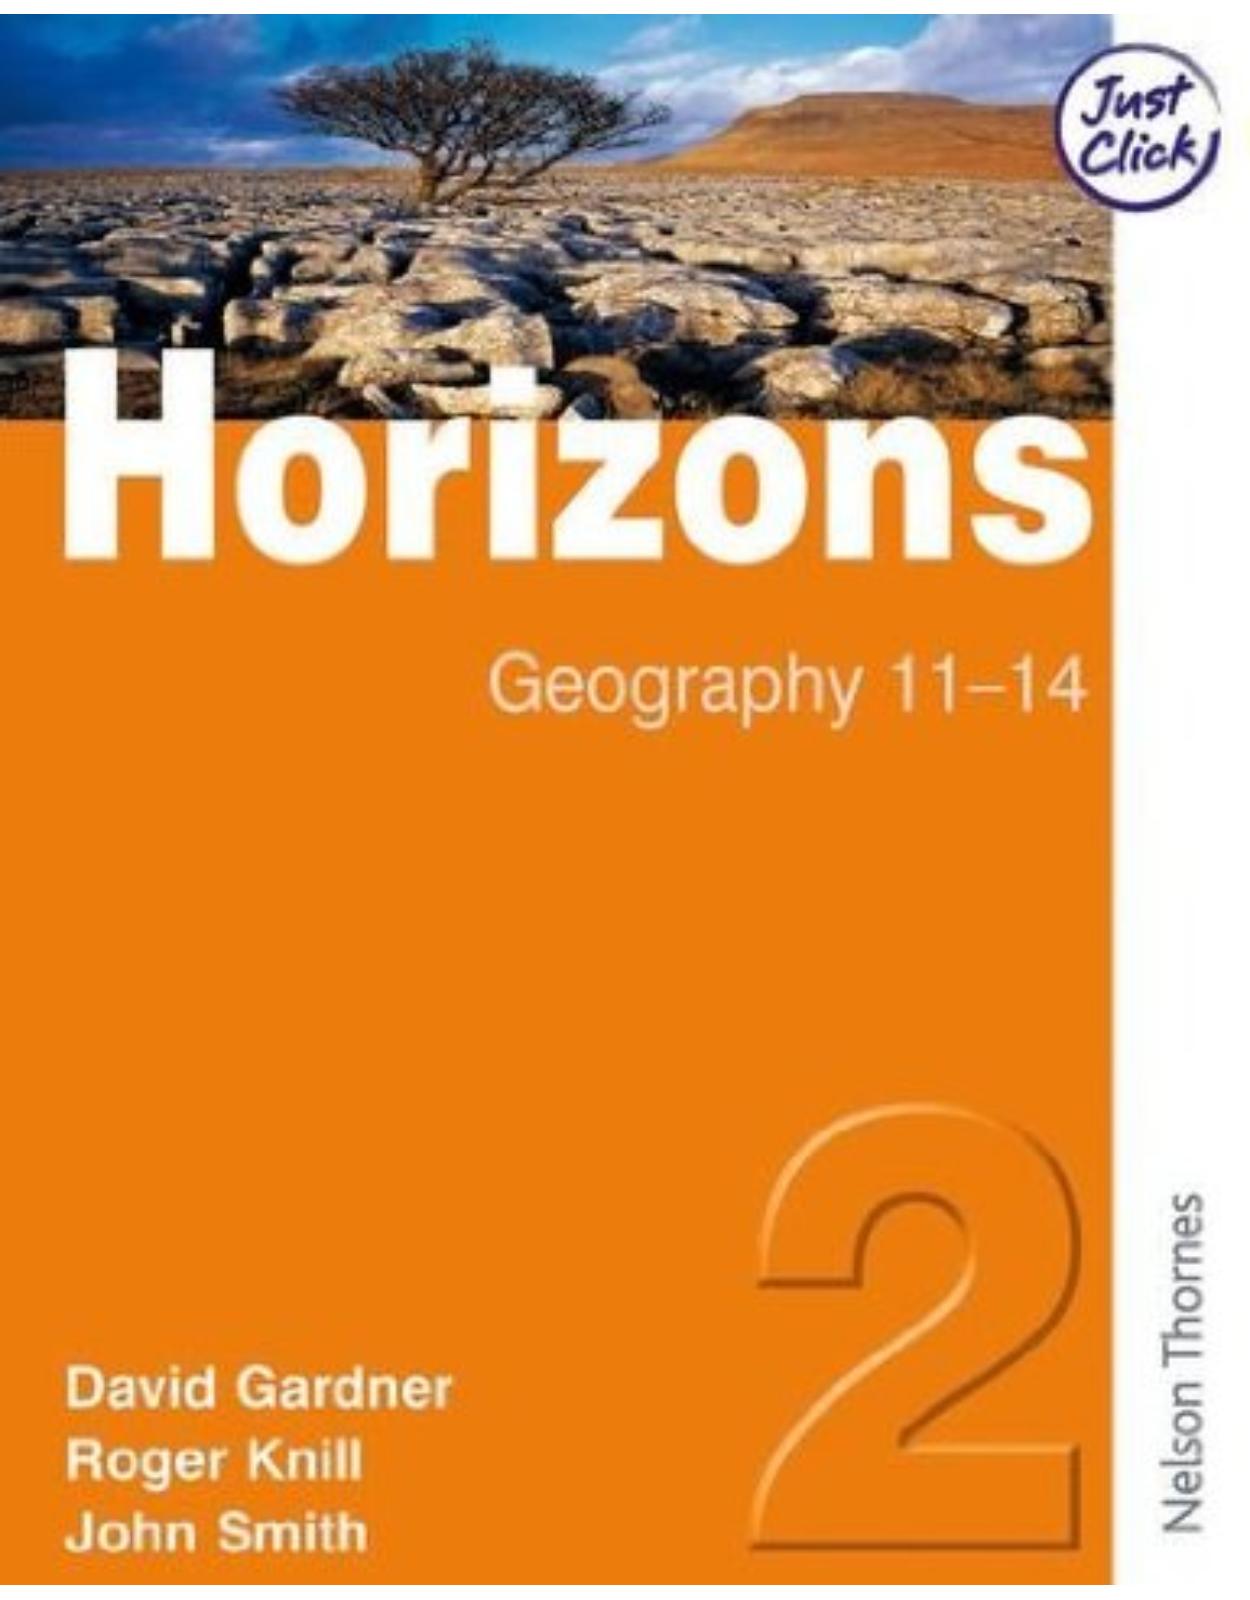 HORIZONS 2 Geography 11-14 Student Book 2: Student Book 2 Year 8